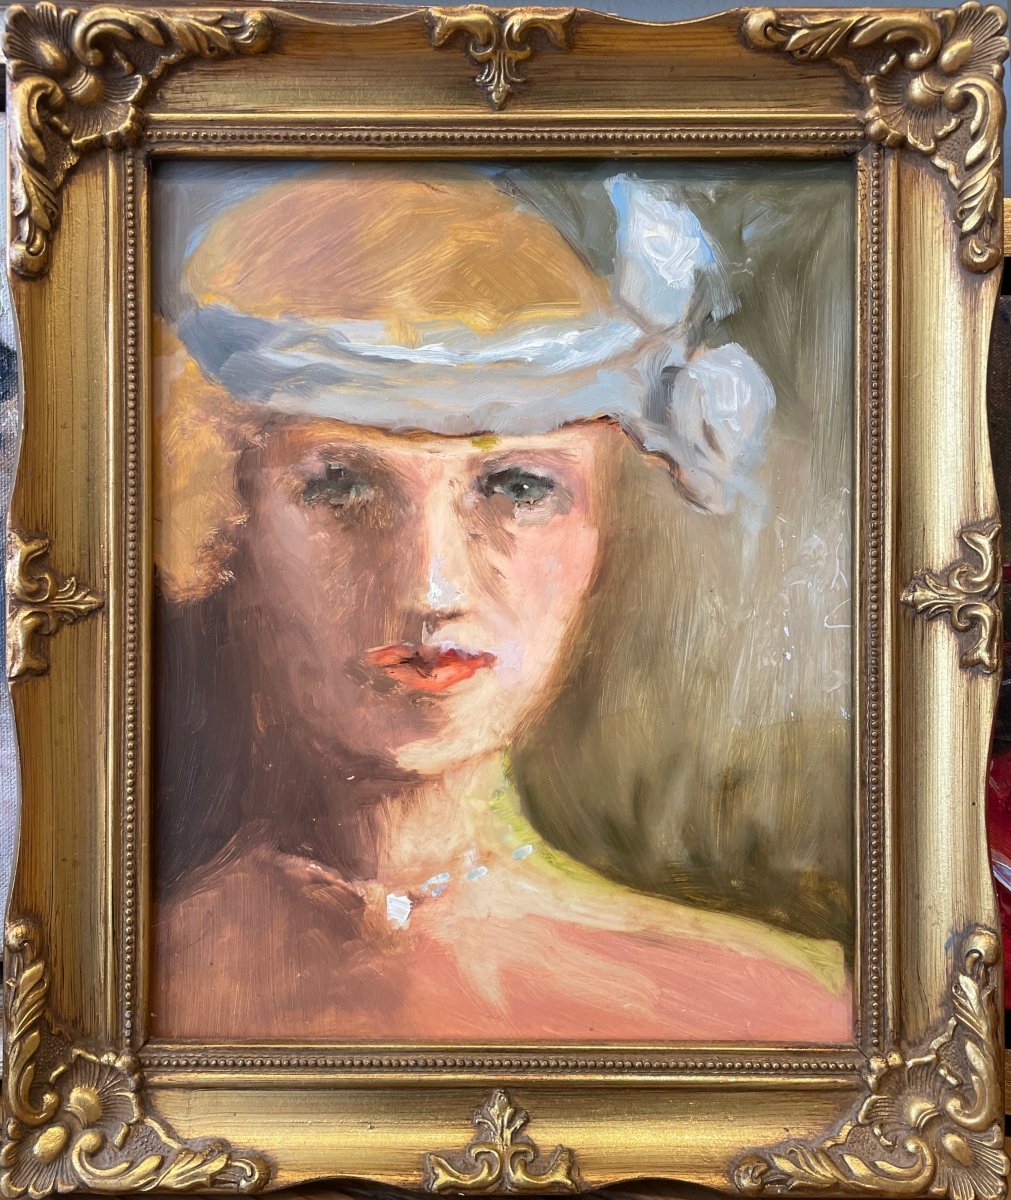 Flapper Girl by Betsy Havens at LePrince Galleries